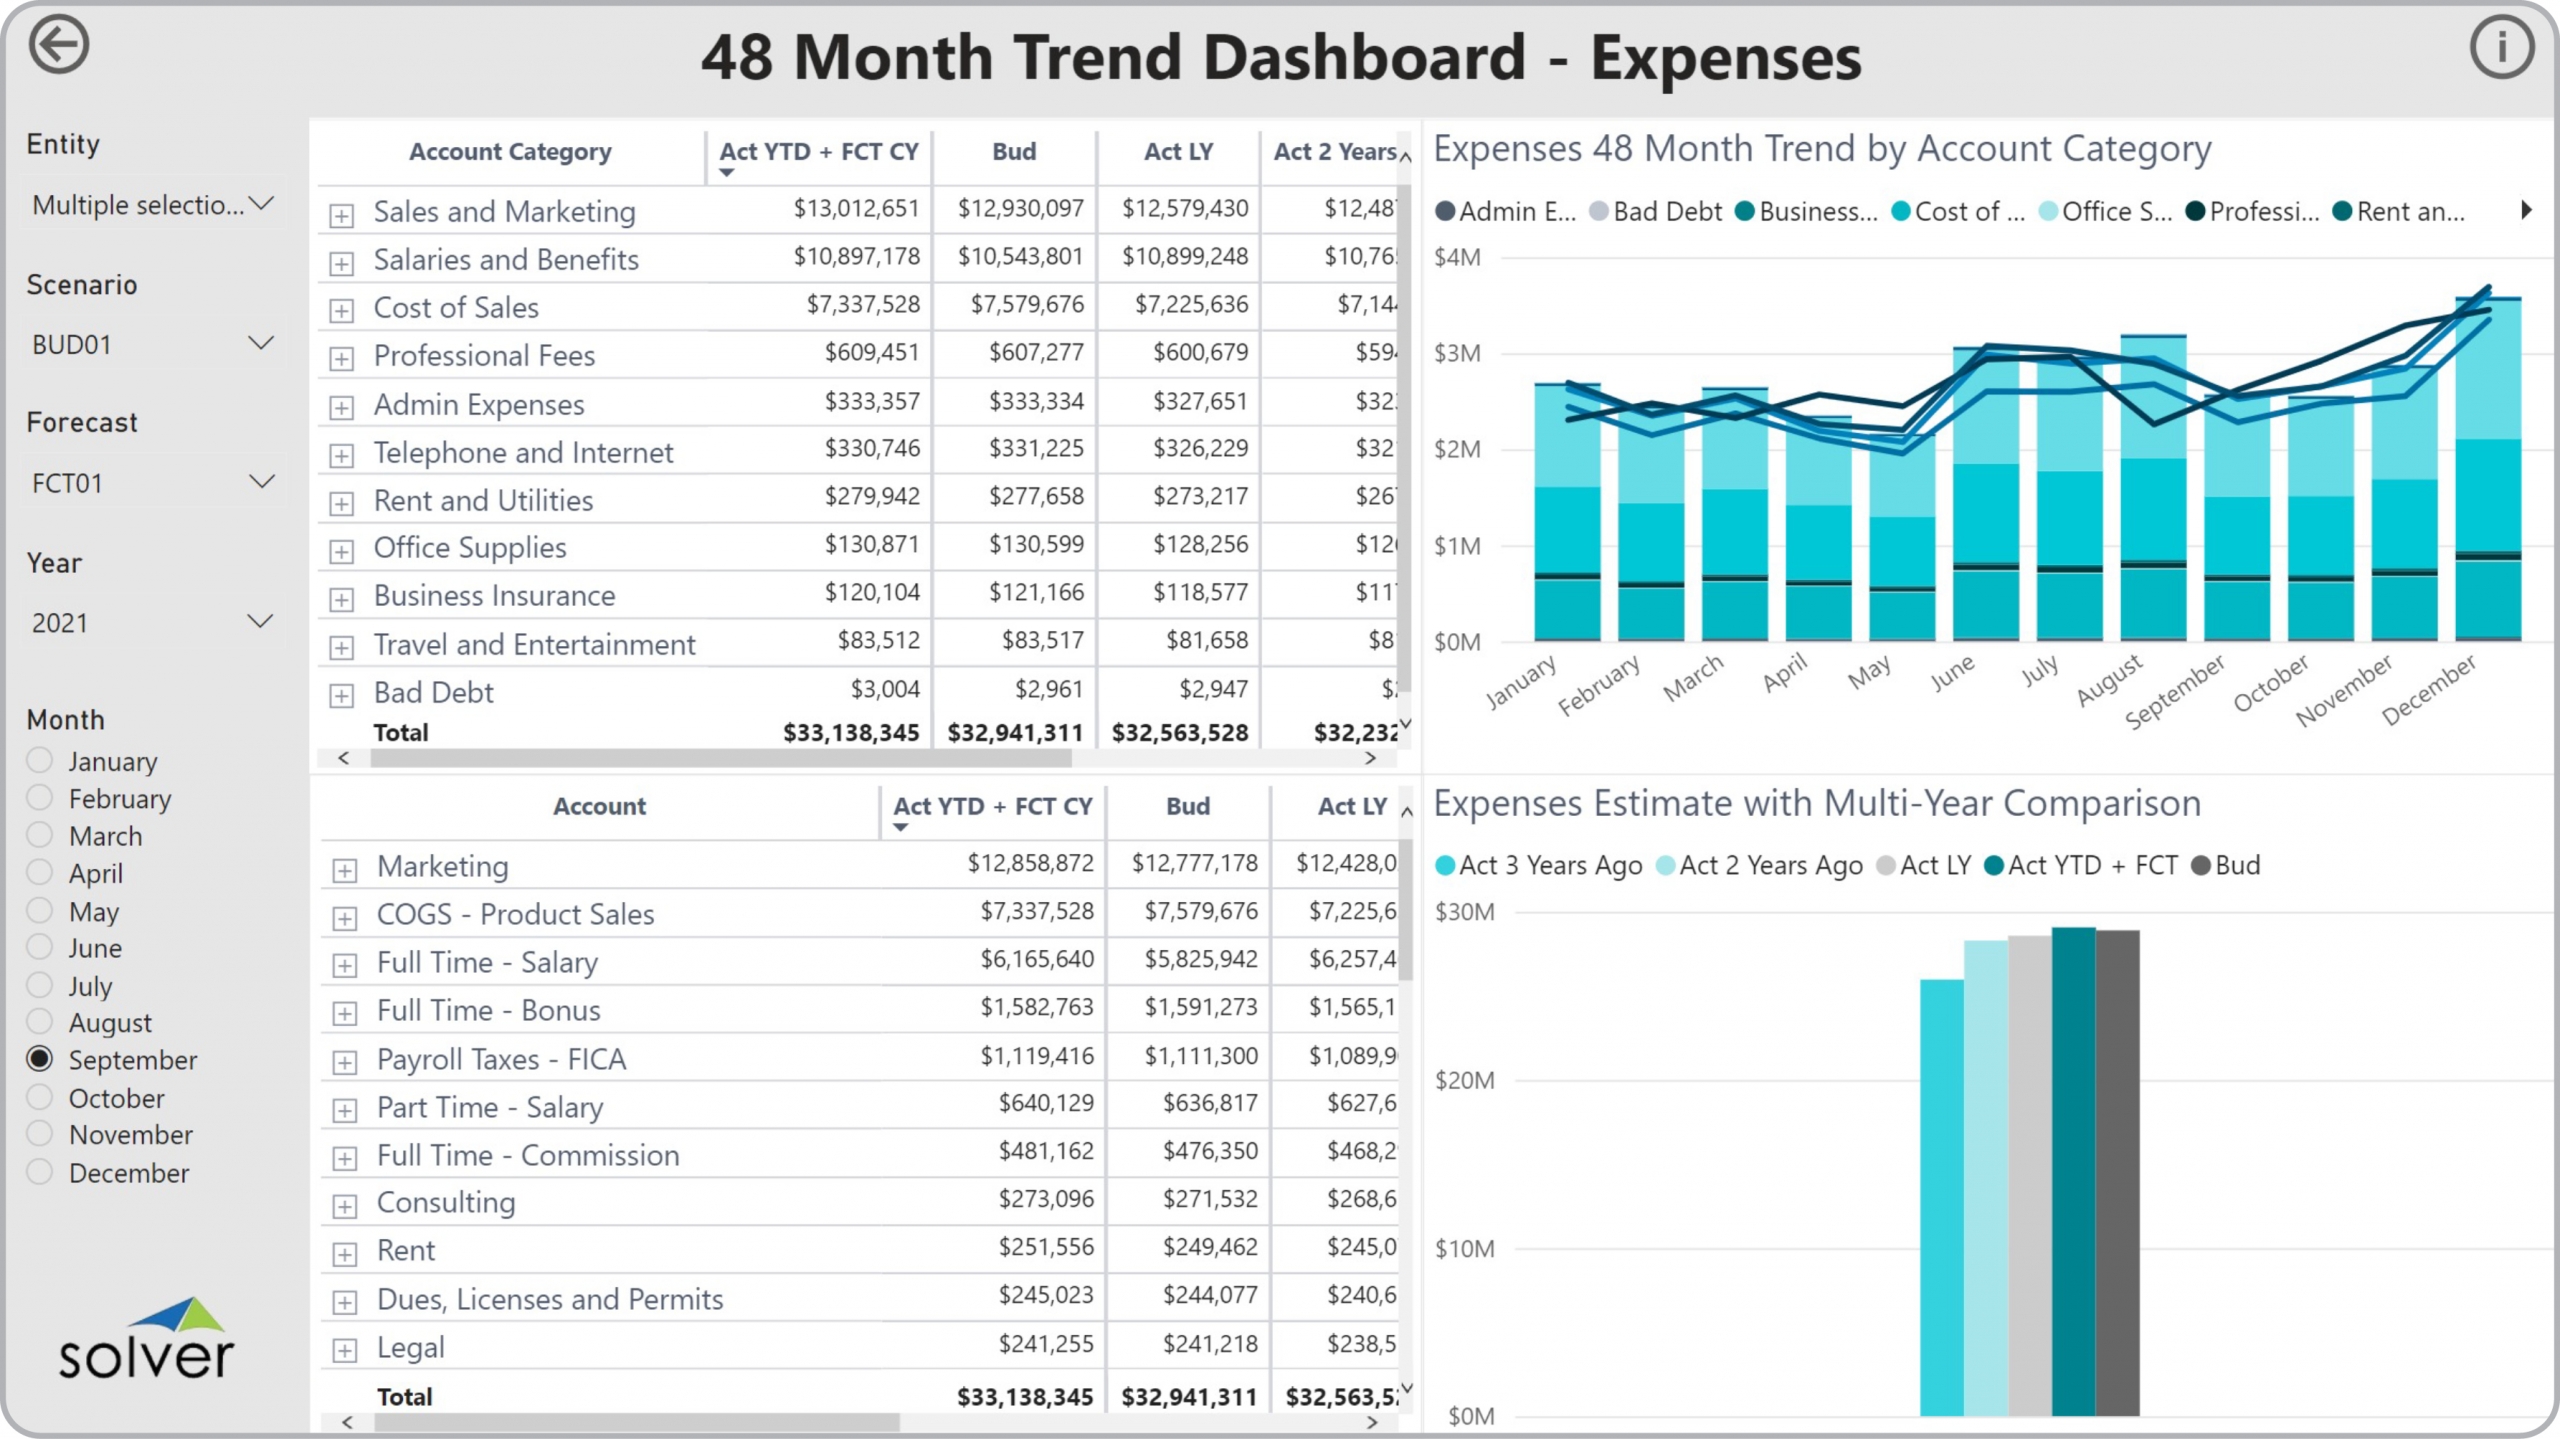 Example of a 48 Month Expense Trend Dashboard to Streamline the Monthly Reporting Process